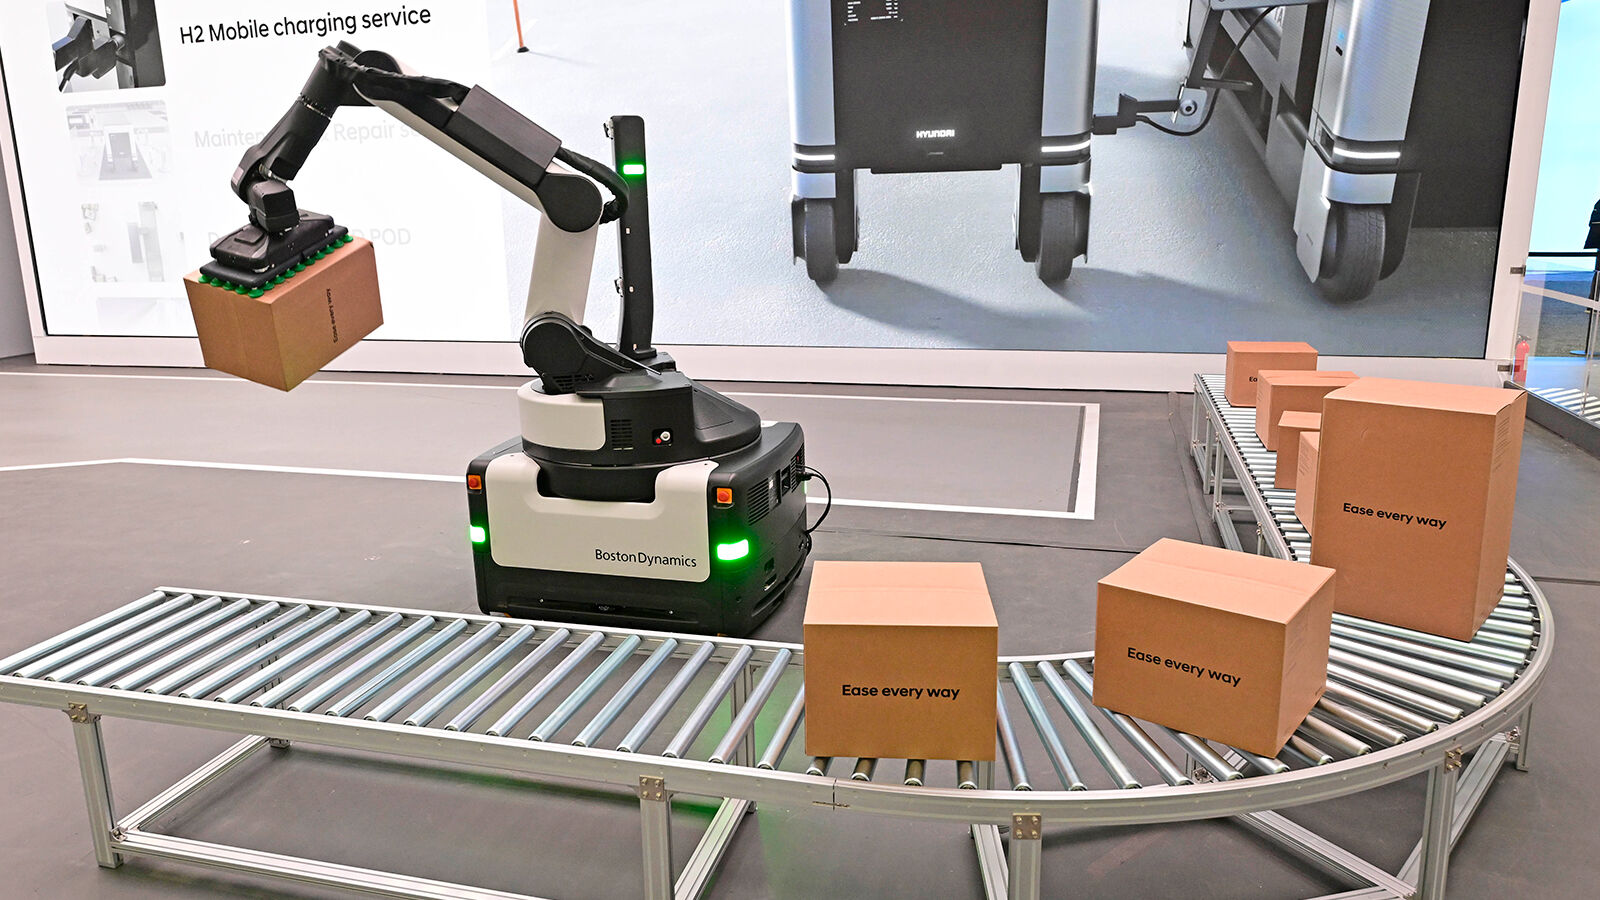 ‘Stretch’, developed by Boston Dynamics, is an autonomous robot for more efficient and safer logistics operations, mainly helping to empty loaded trailers and shipping containers in warehouses.